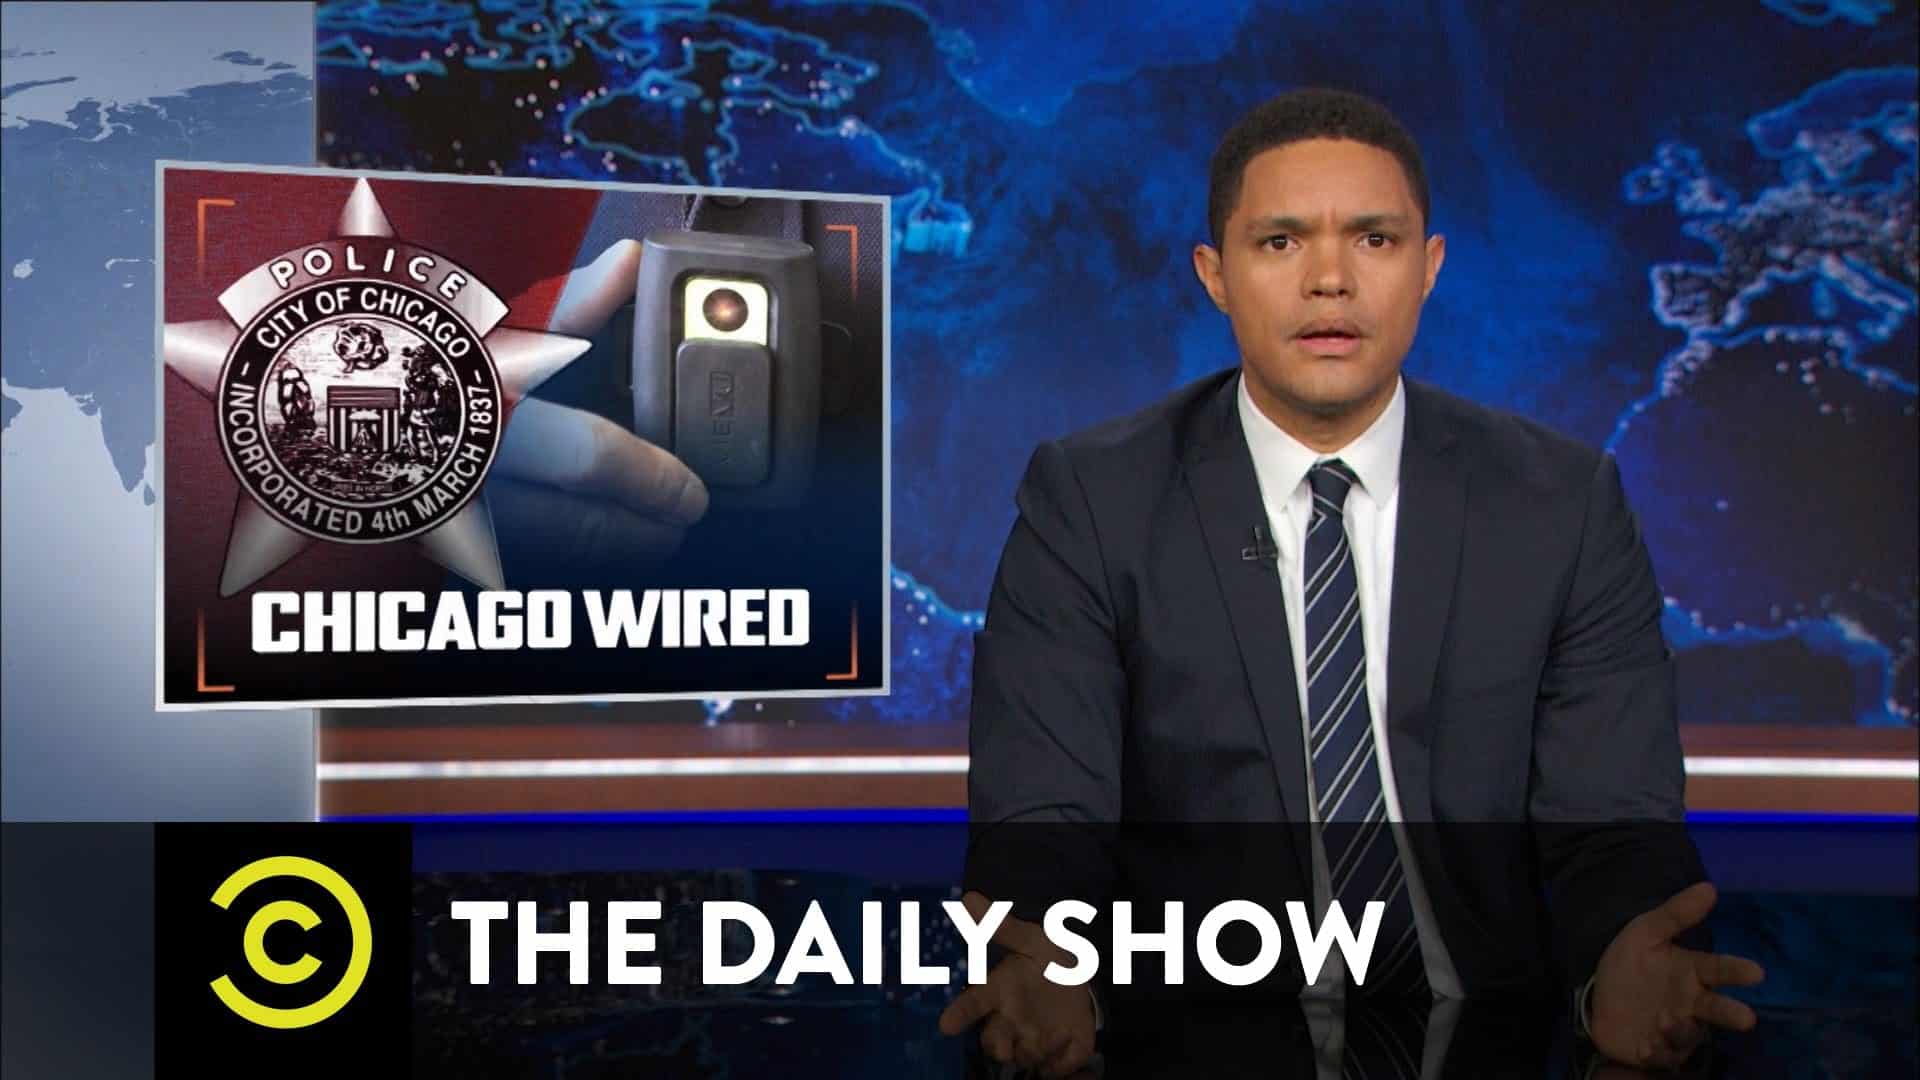 Trevor Noah On The Suspicious Activity Of The Recent Chicago Police Shooting Incident! "Why Are The Police Only Sloppy With Evidence Against Them?" 1